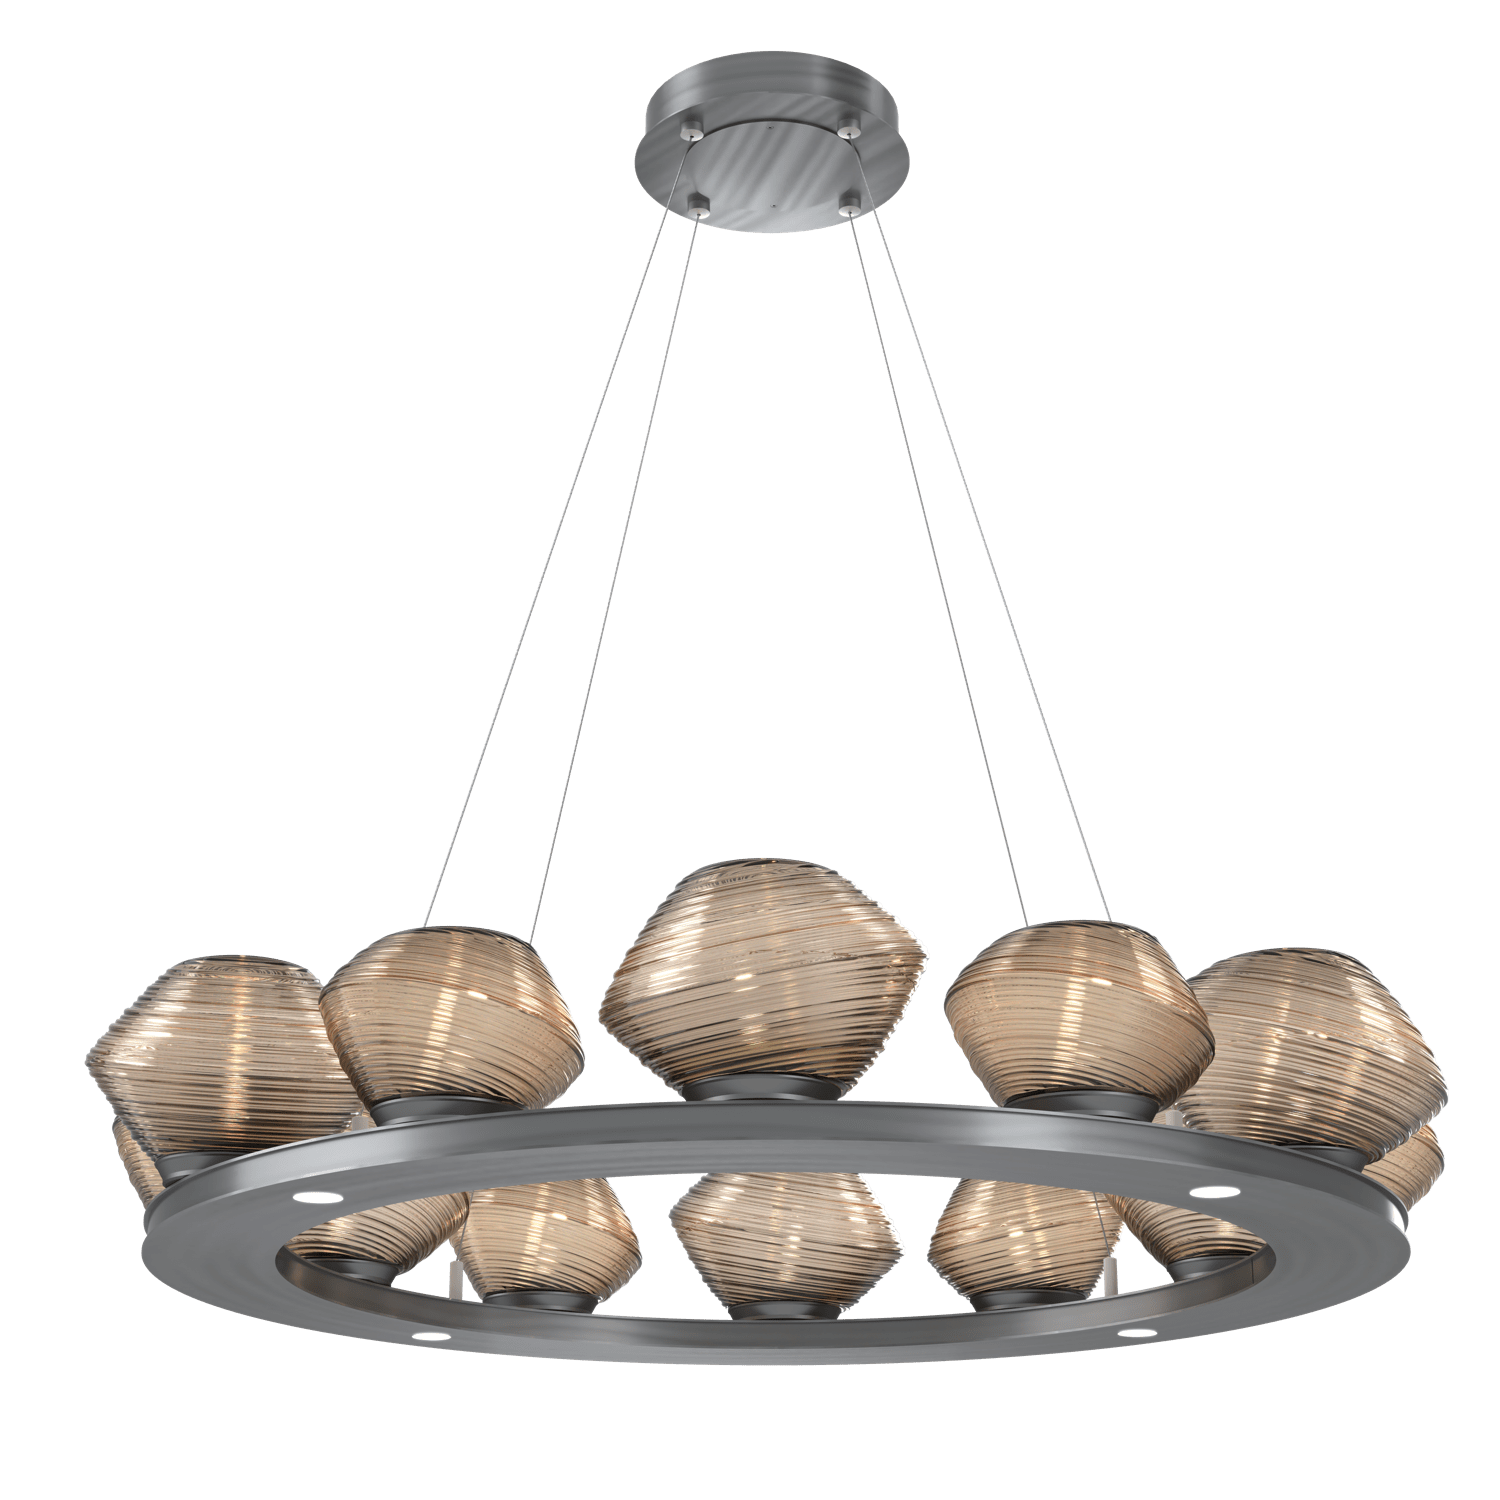 CHB0089-0C-GM-B-Hammerton-Studio-Mesa-36-inch-ring-chandelier-with-gunmetal-finish-and-bronze-blown-glass-shades-and-LED-lamping